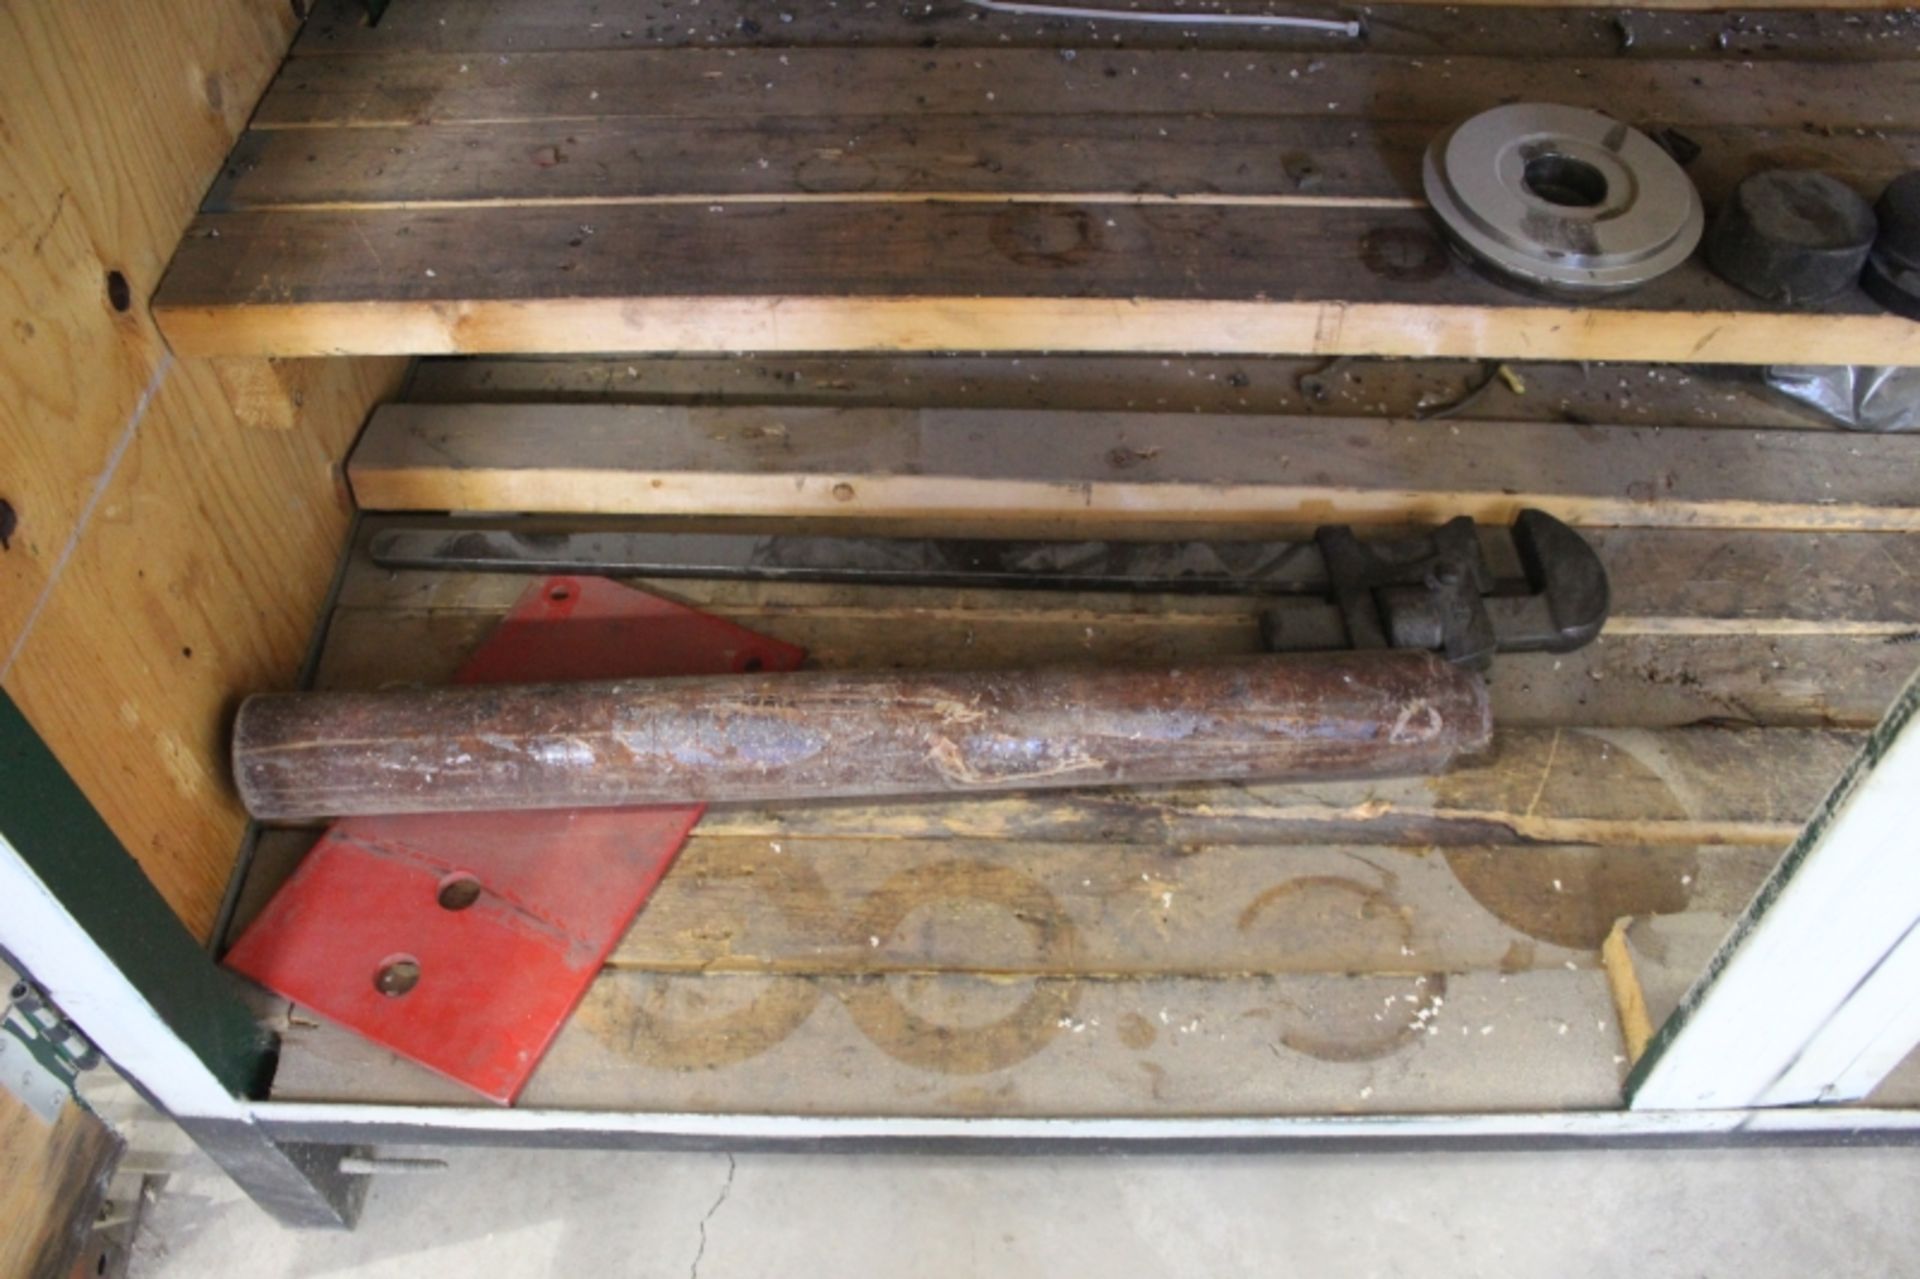 Work Bench with Assorted Sleeves, Boring bar, and Pipe Wrench - Image 4 of 4